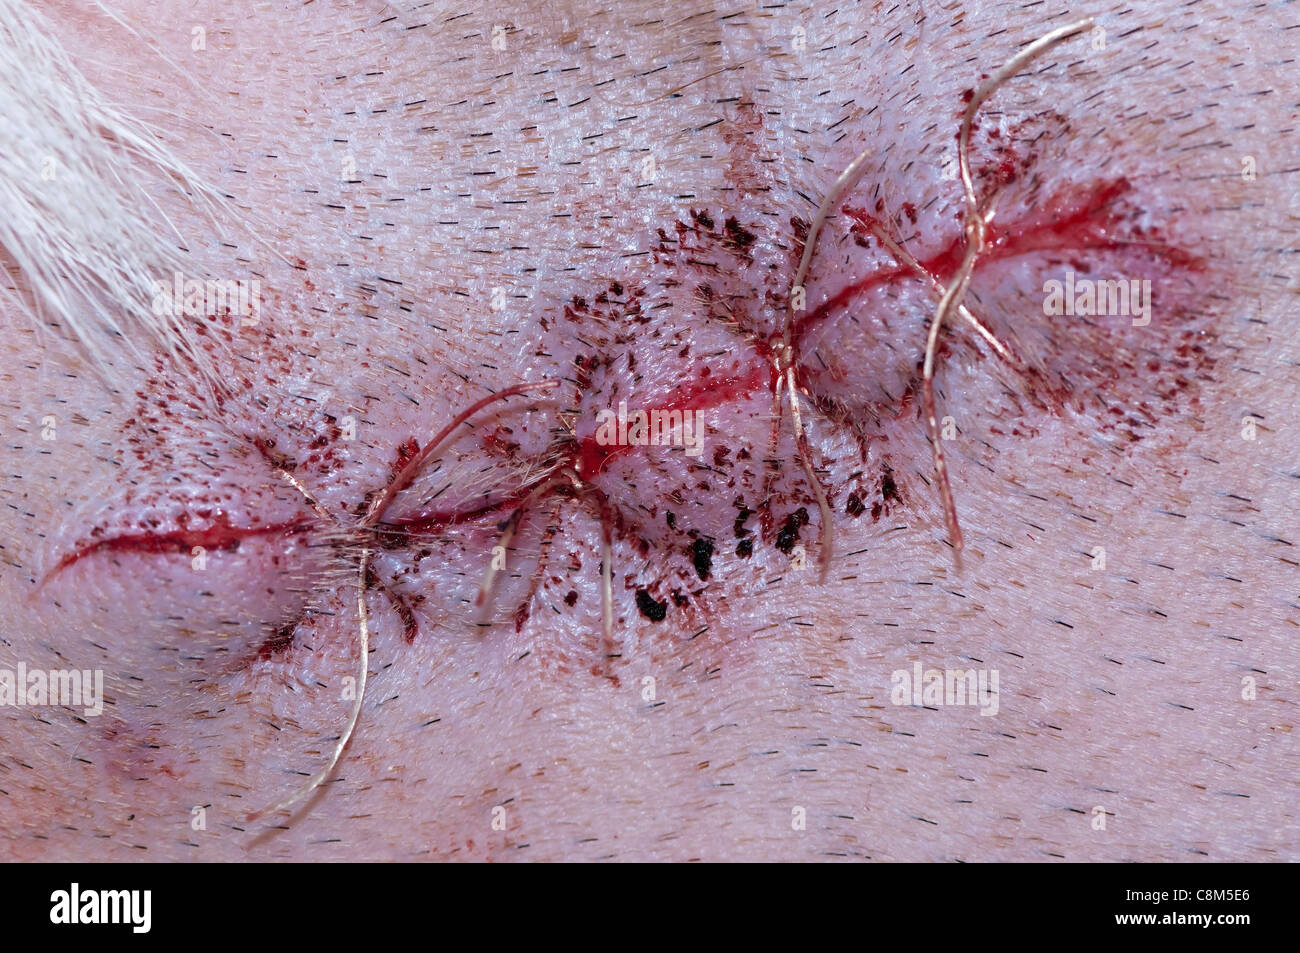 New stitches on a surgical operation suture on a dog. Stock Photo